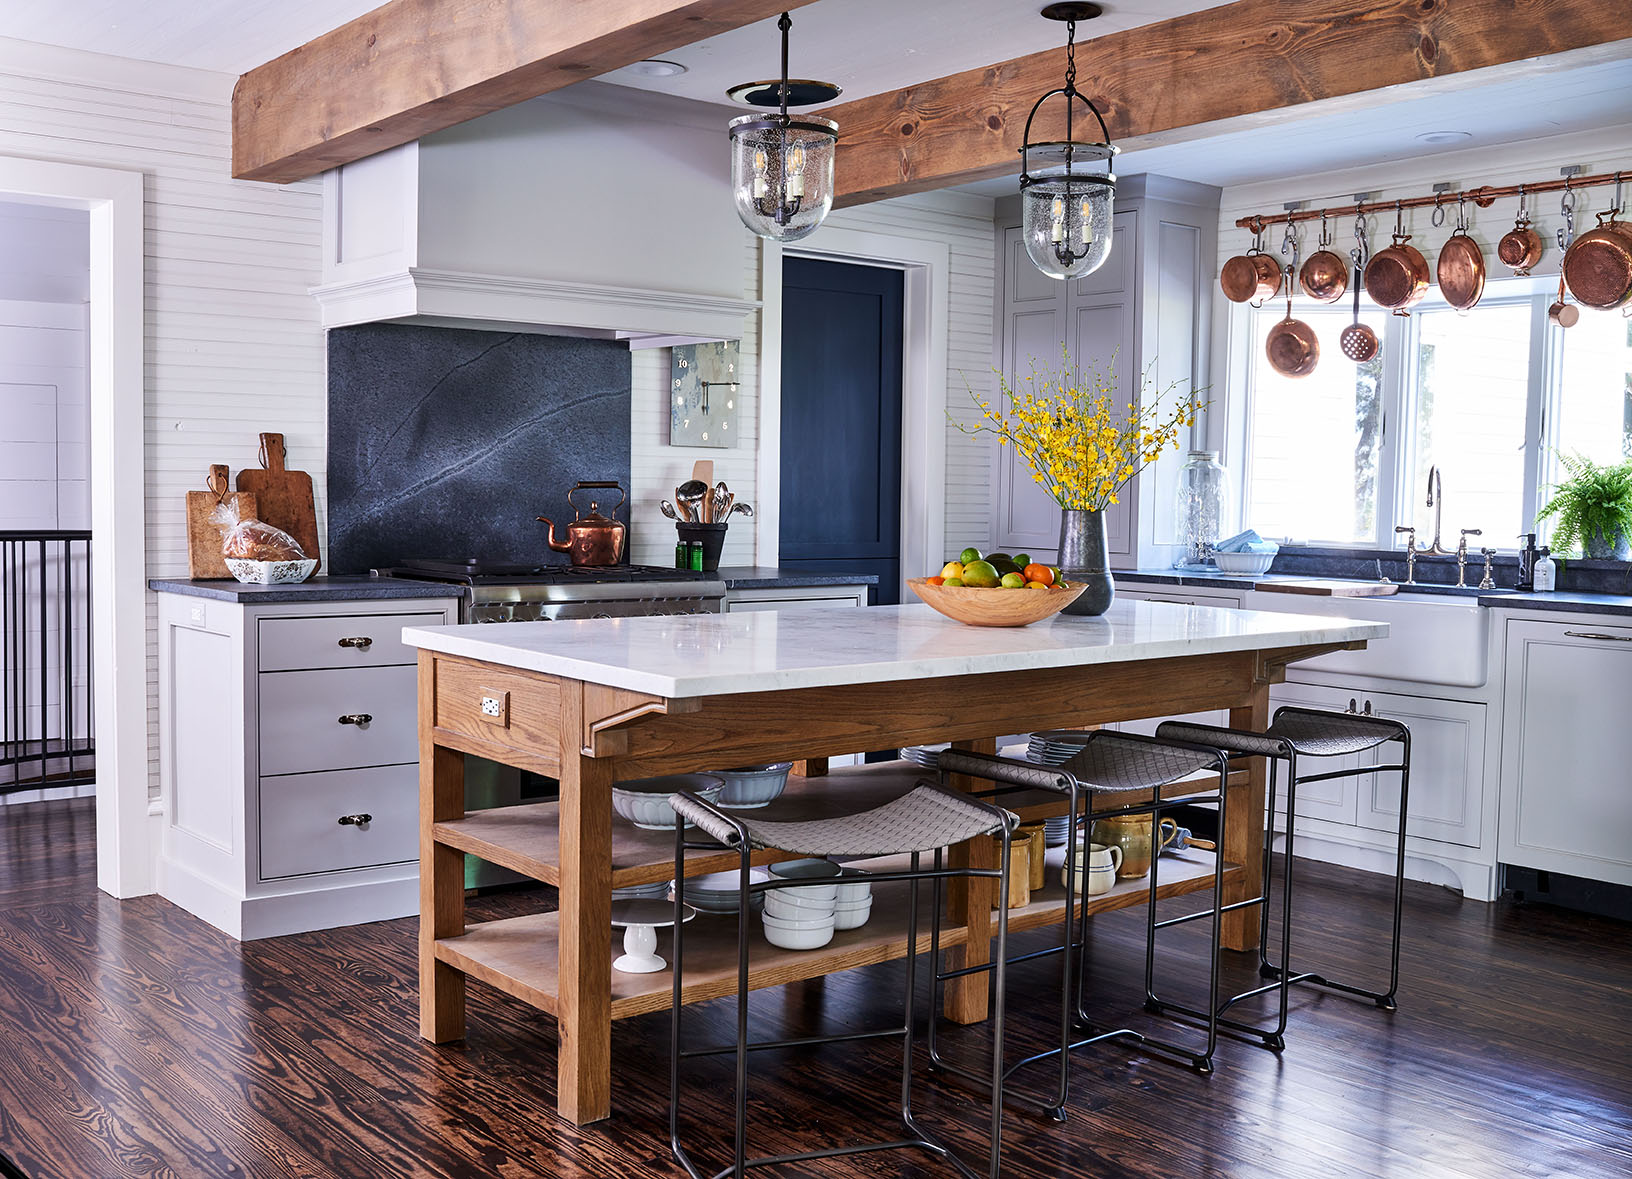 Kitchen Island by Marie Flanigan Interiors in Southern Living Magazine in Brenham Texas by Alison Gootee Photography